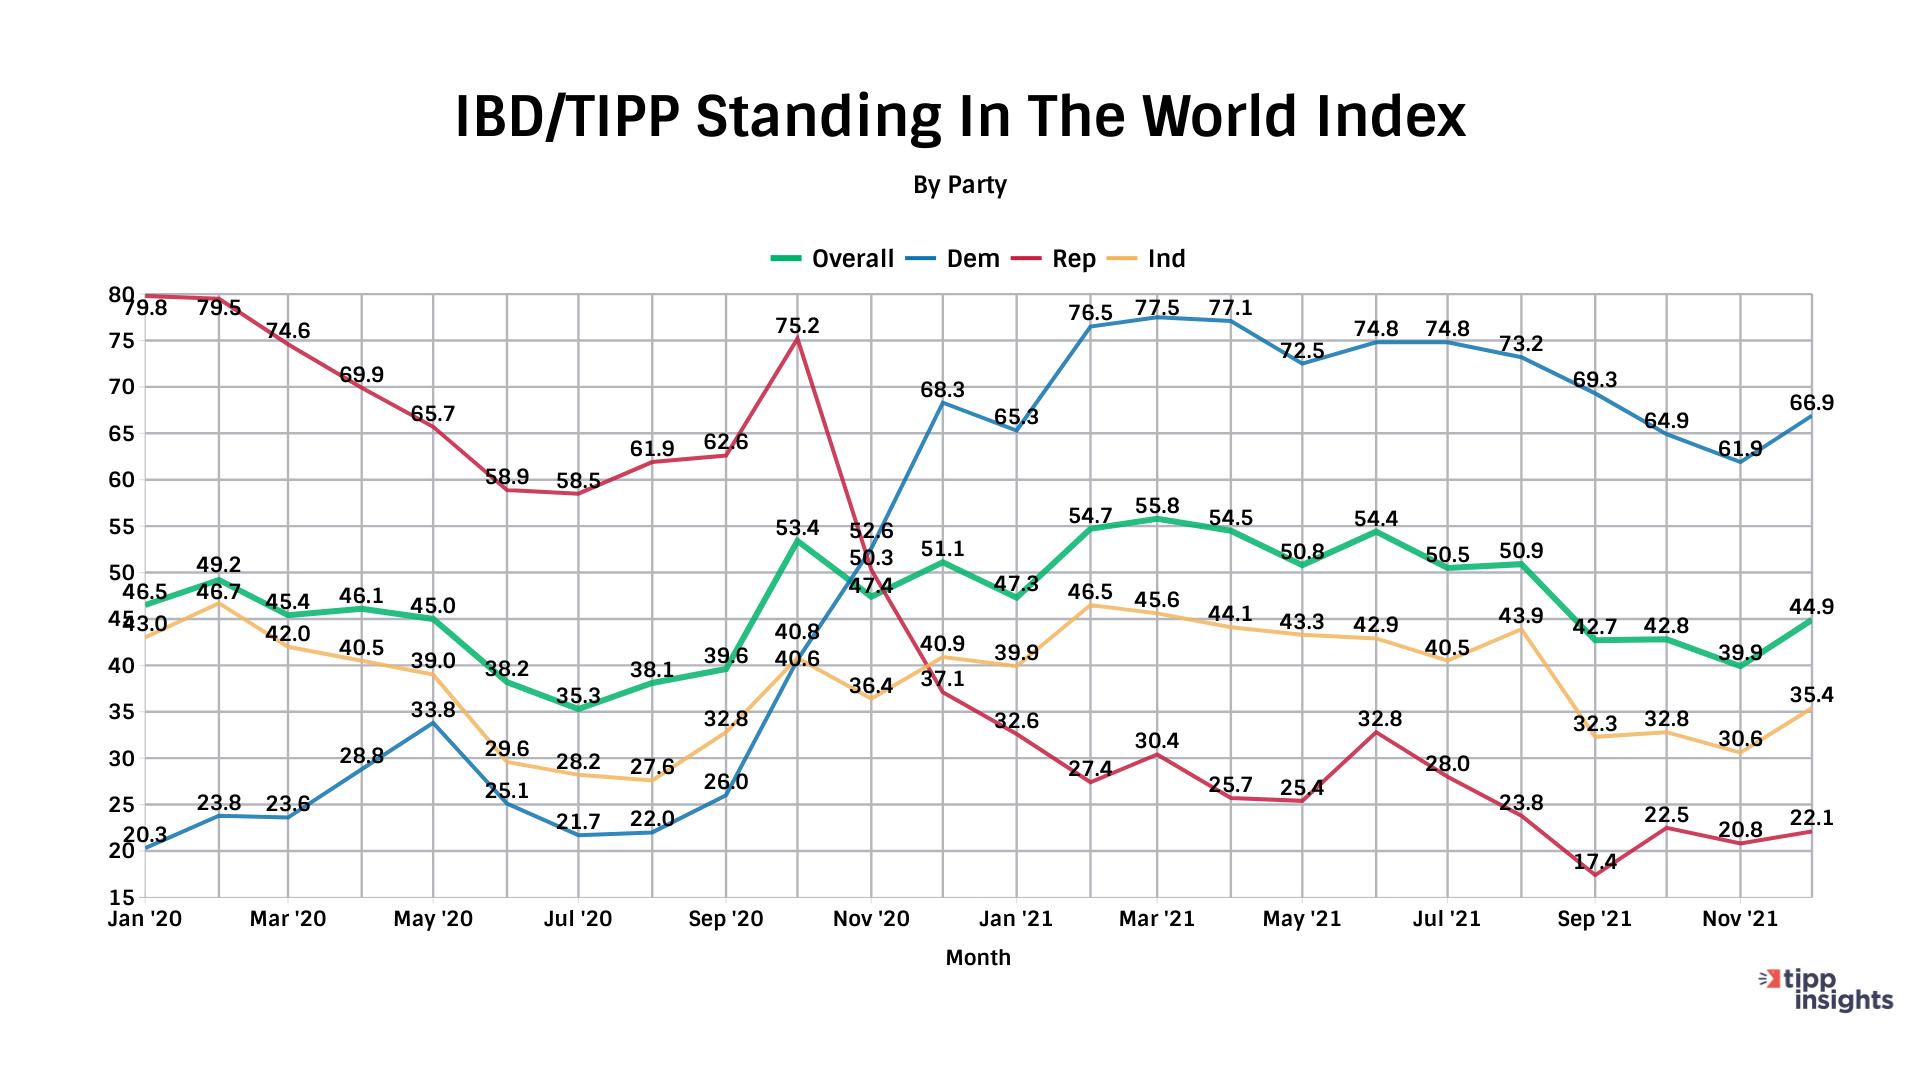 IBD/TIPP Poll Results: Standing in the world index by political party